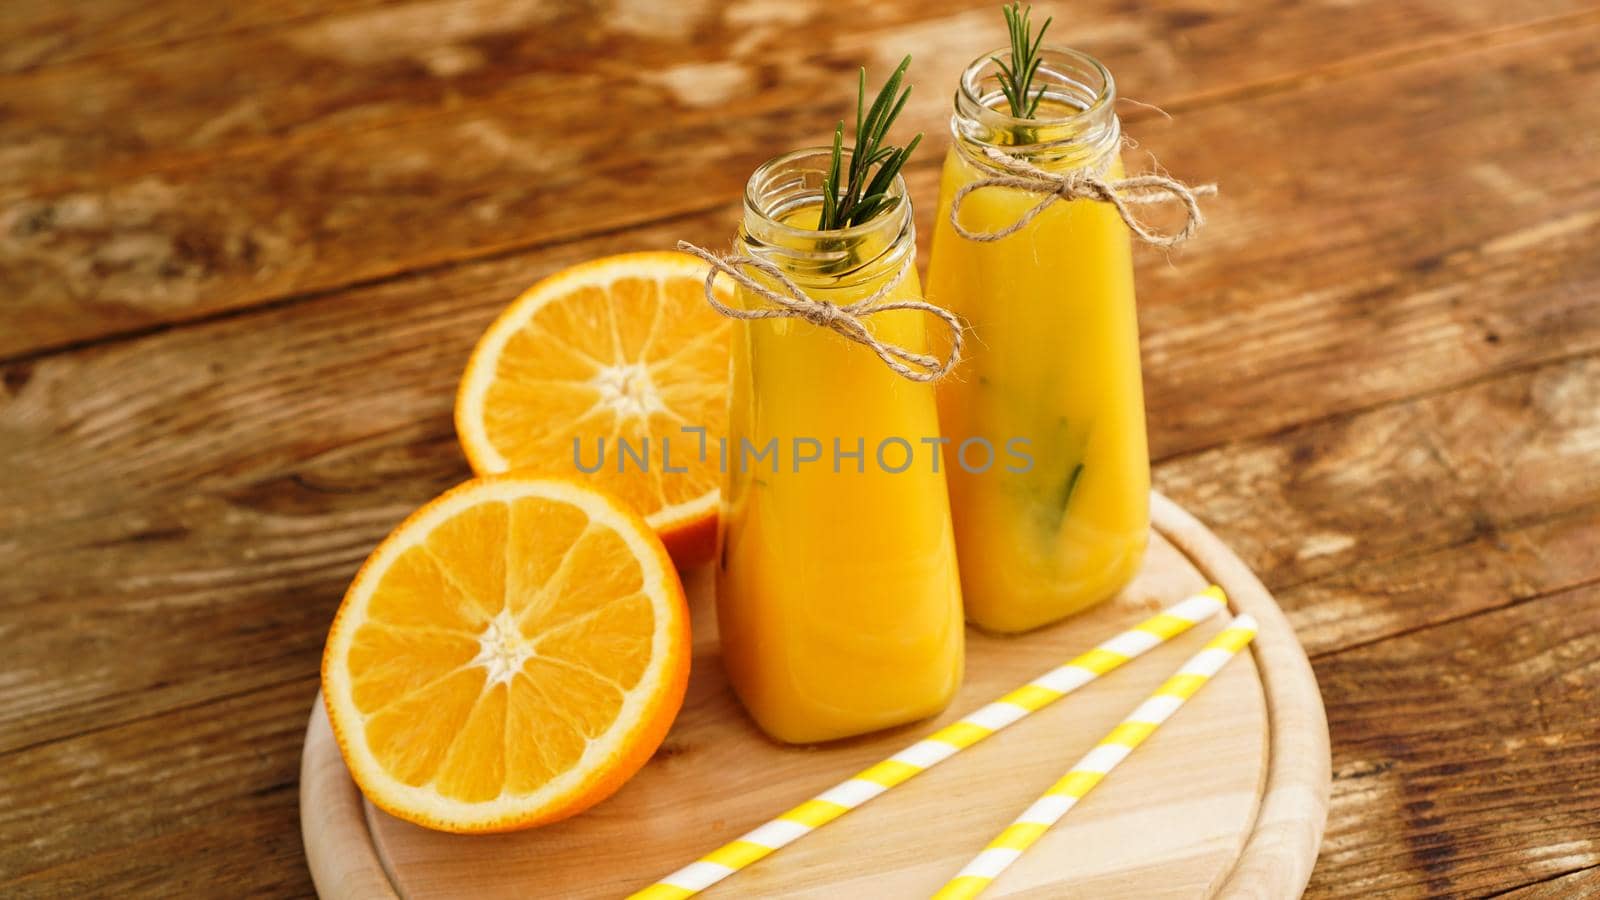 Orange juice in glass bottles. The juice is decorated with a sprig of rosemary by natali_brill